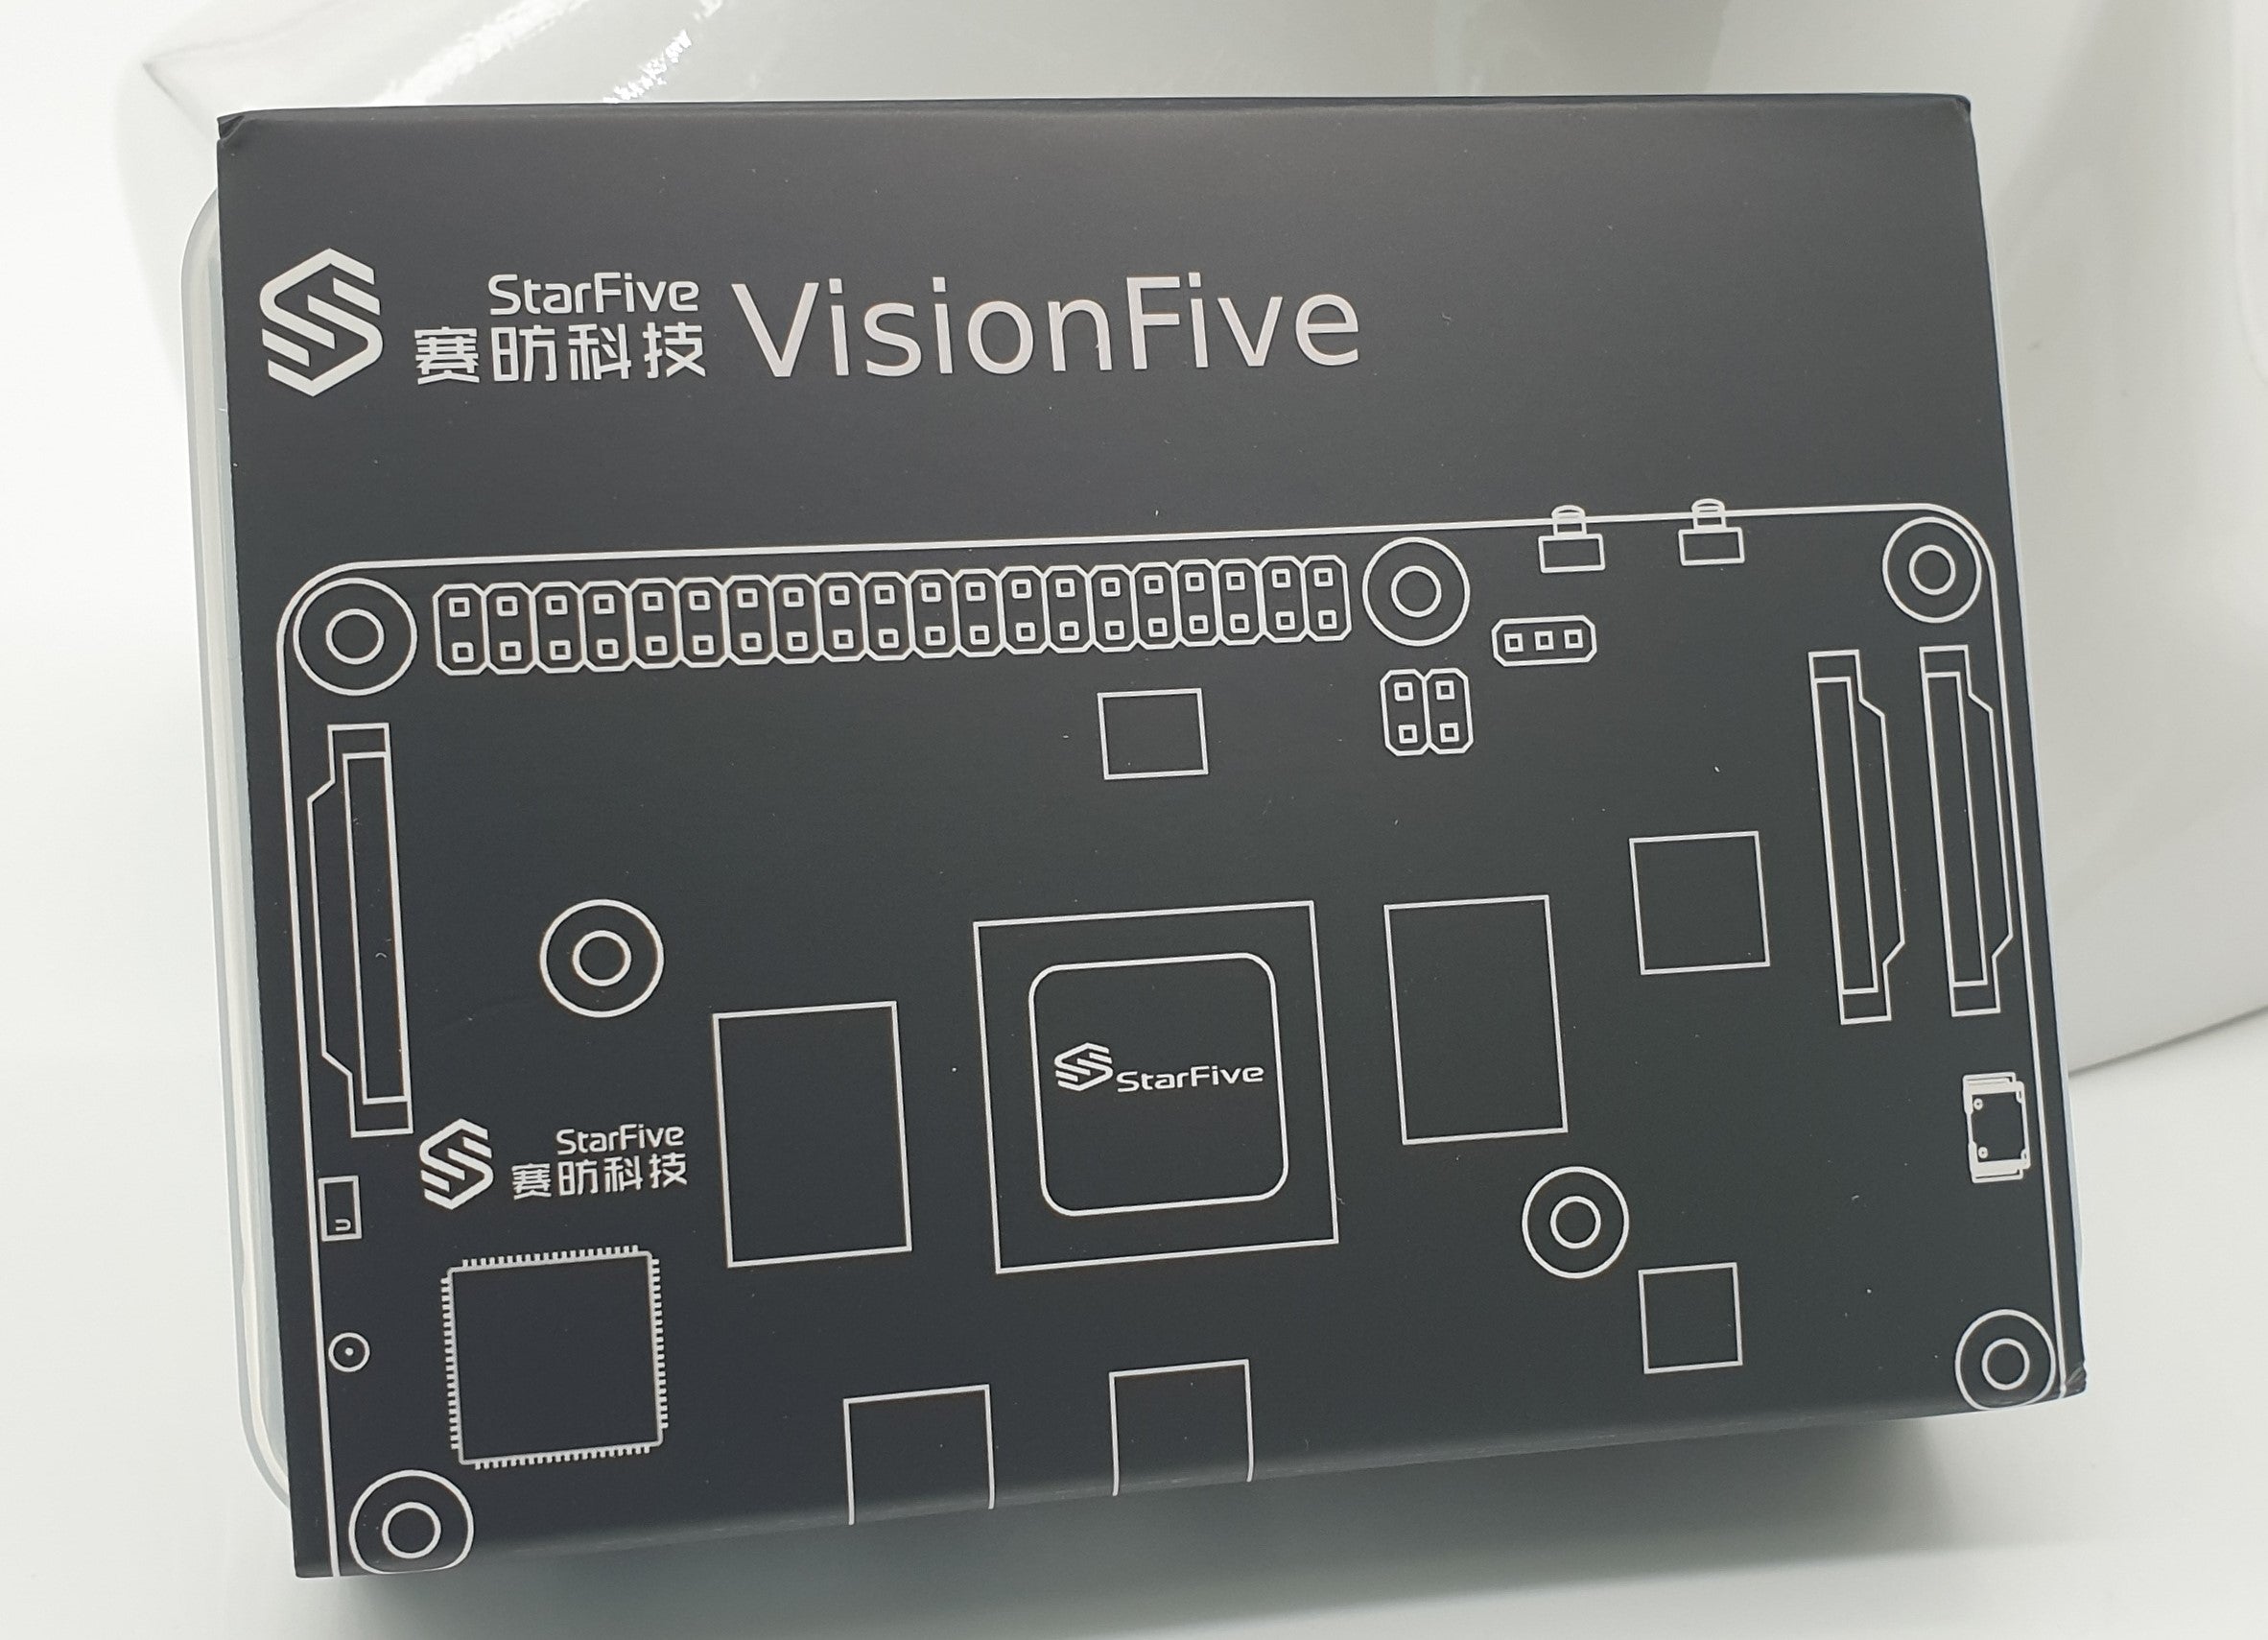 StarFive VisionFive boards arrived - shipments start today!